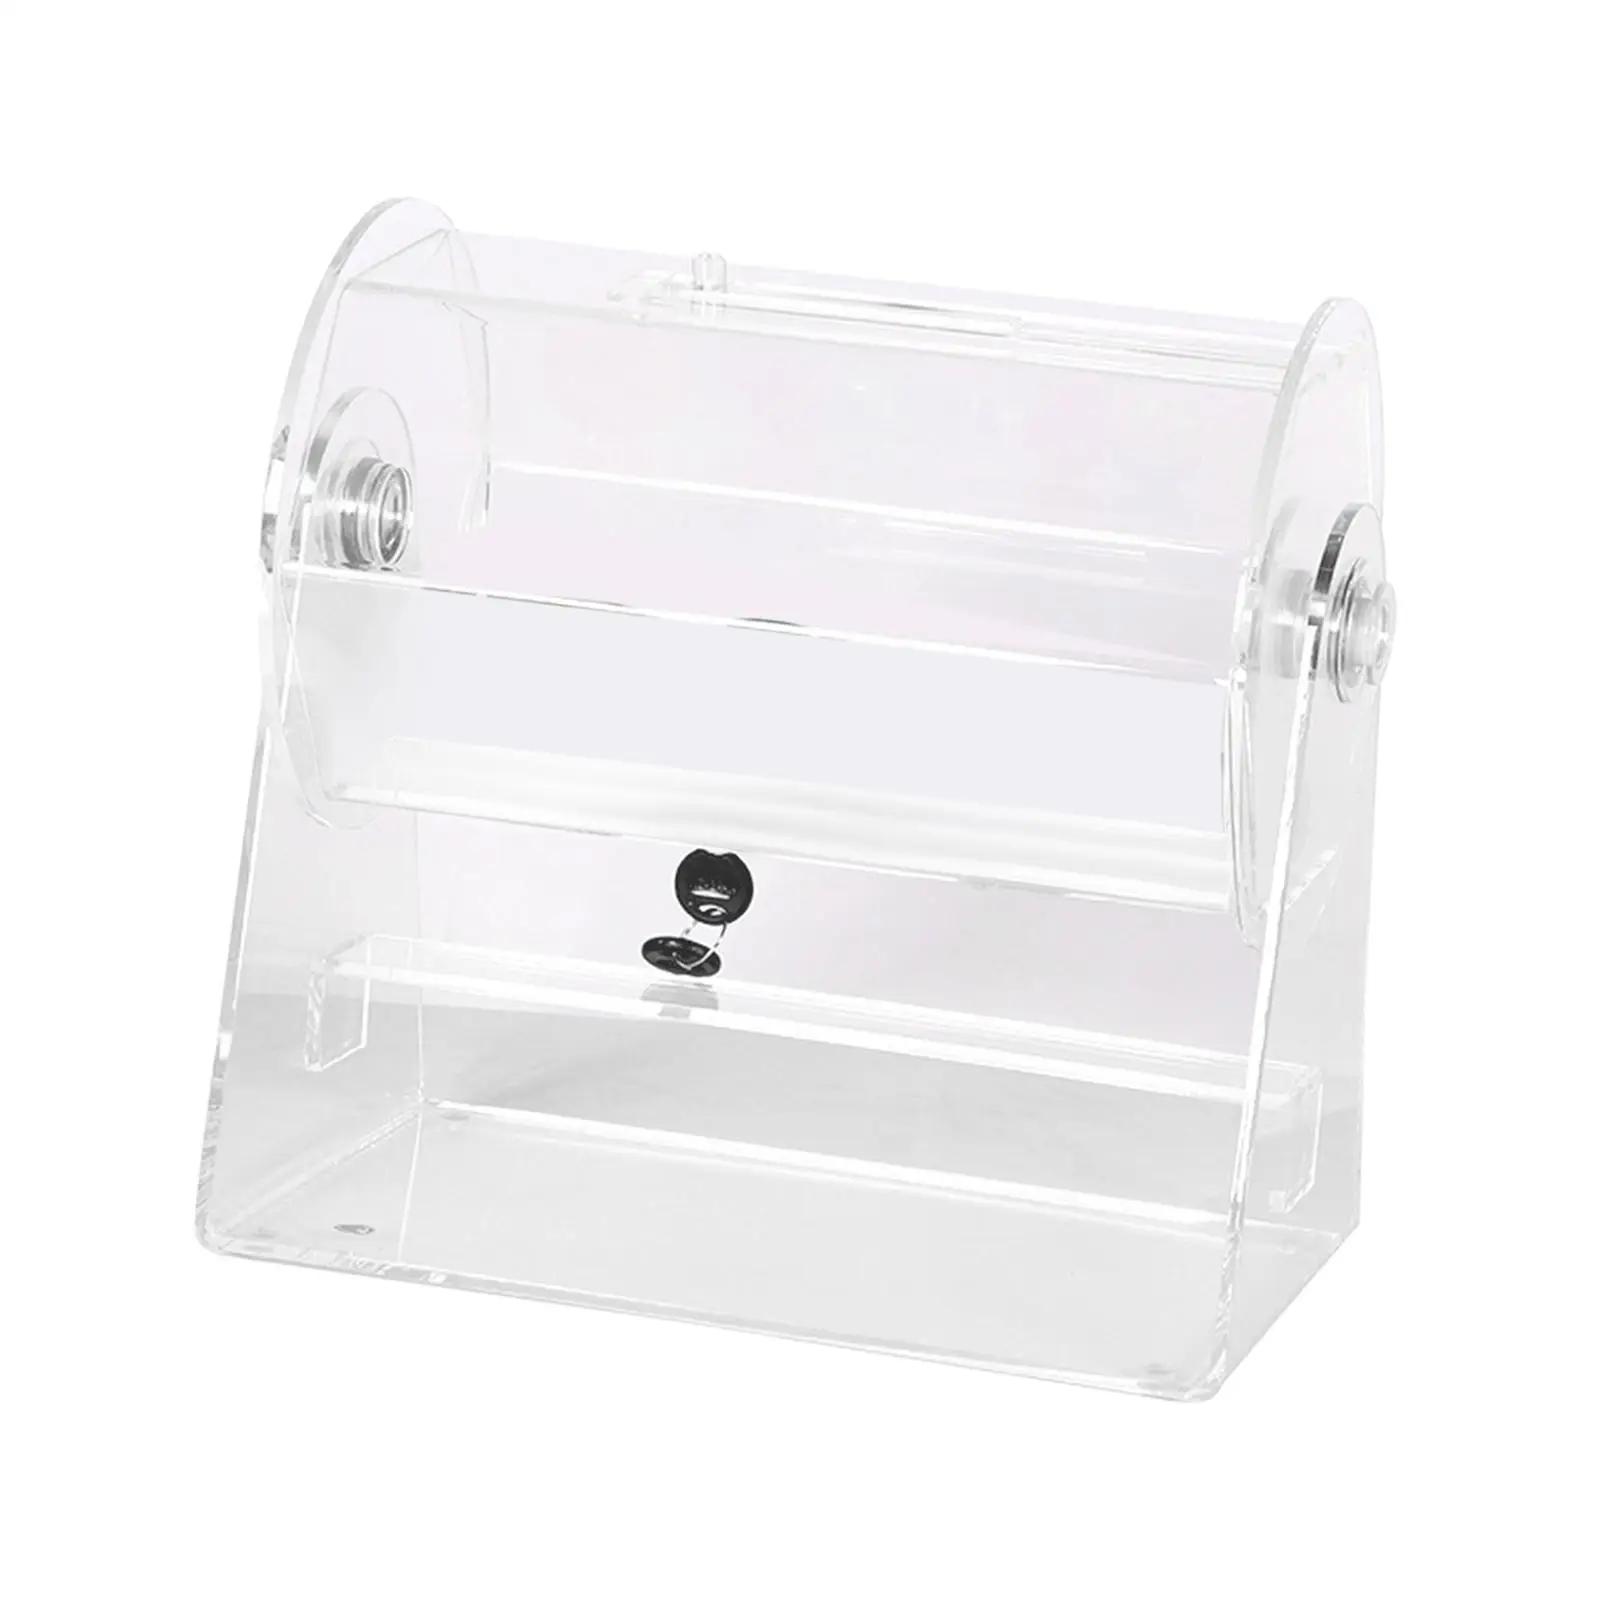 Raffle Cage Practical Storage Organizer Portable for Indoor Office Meeting